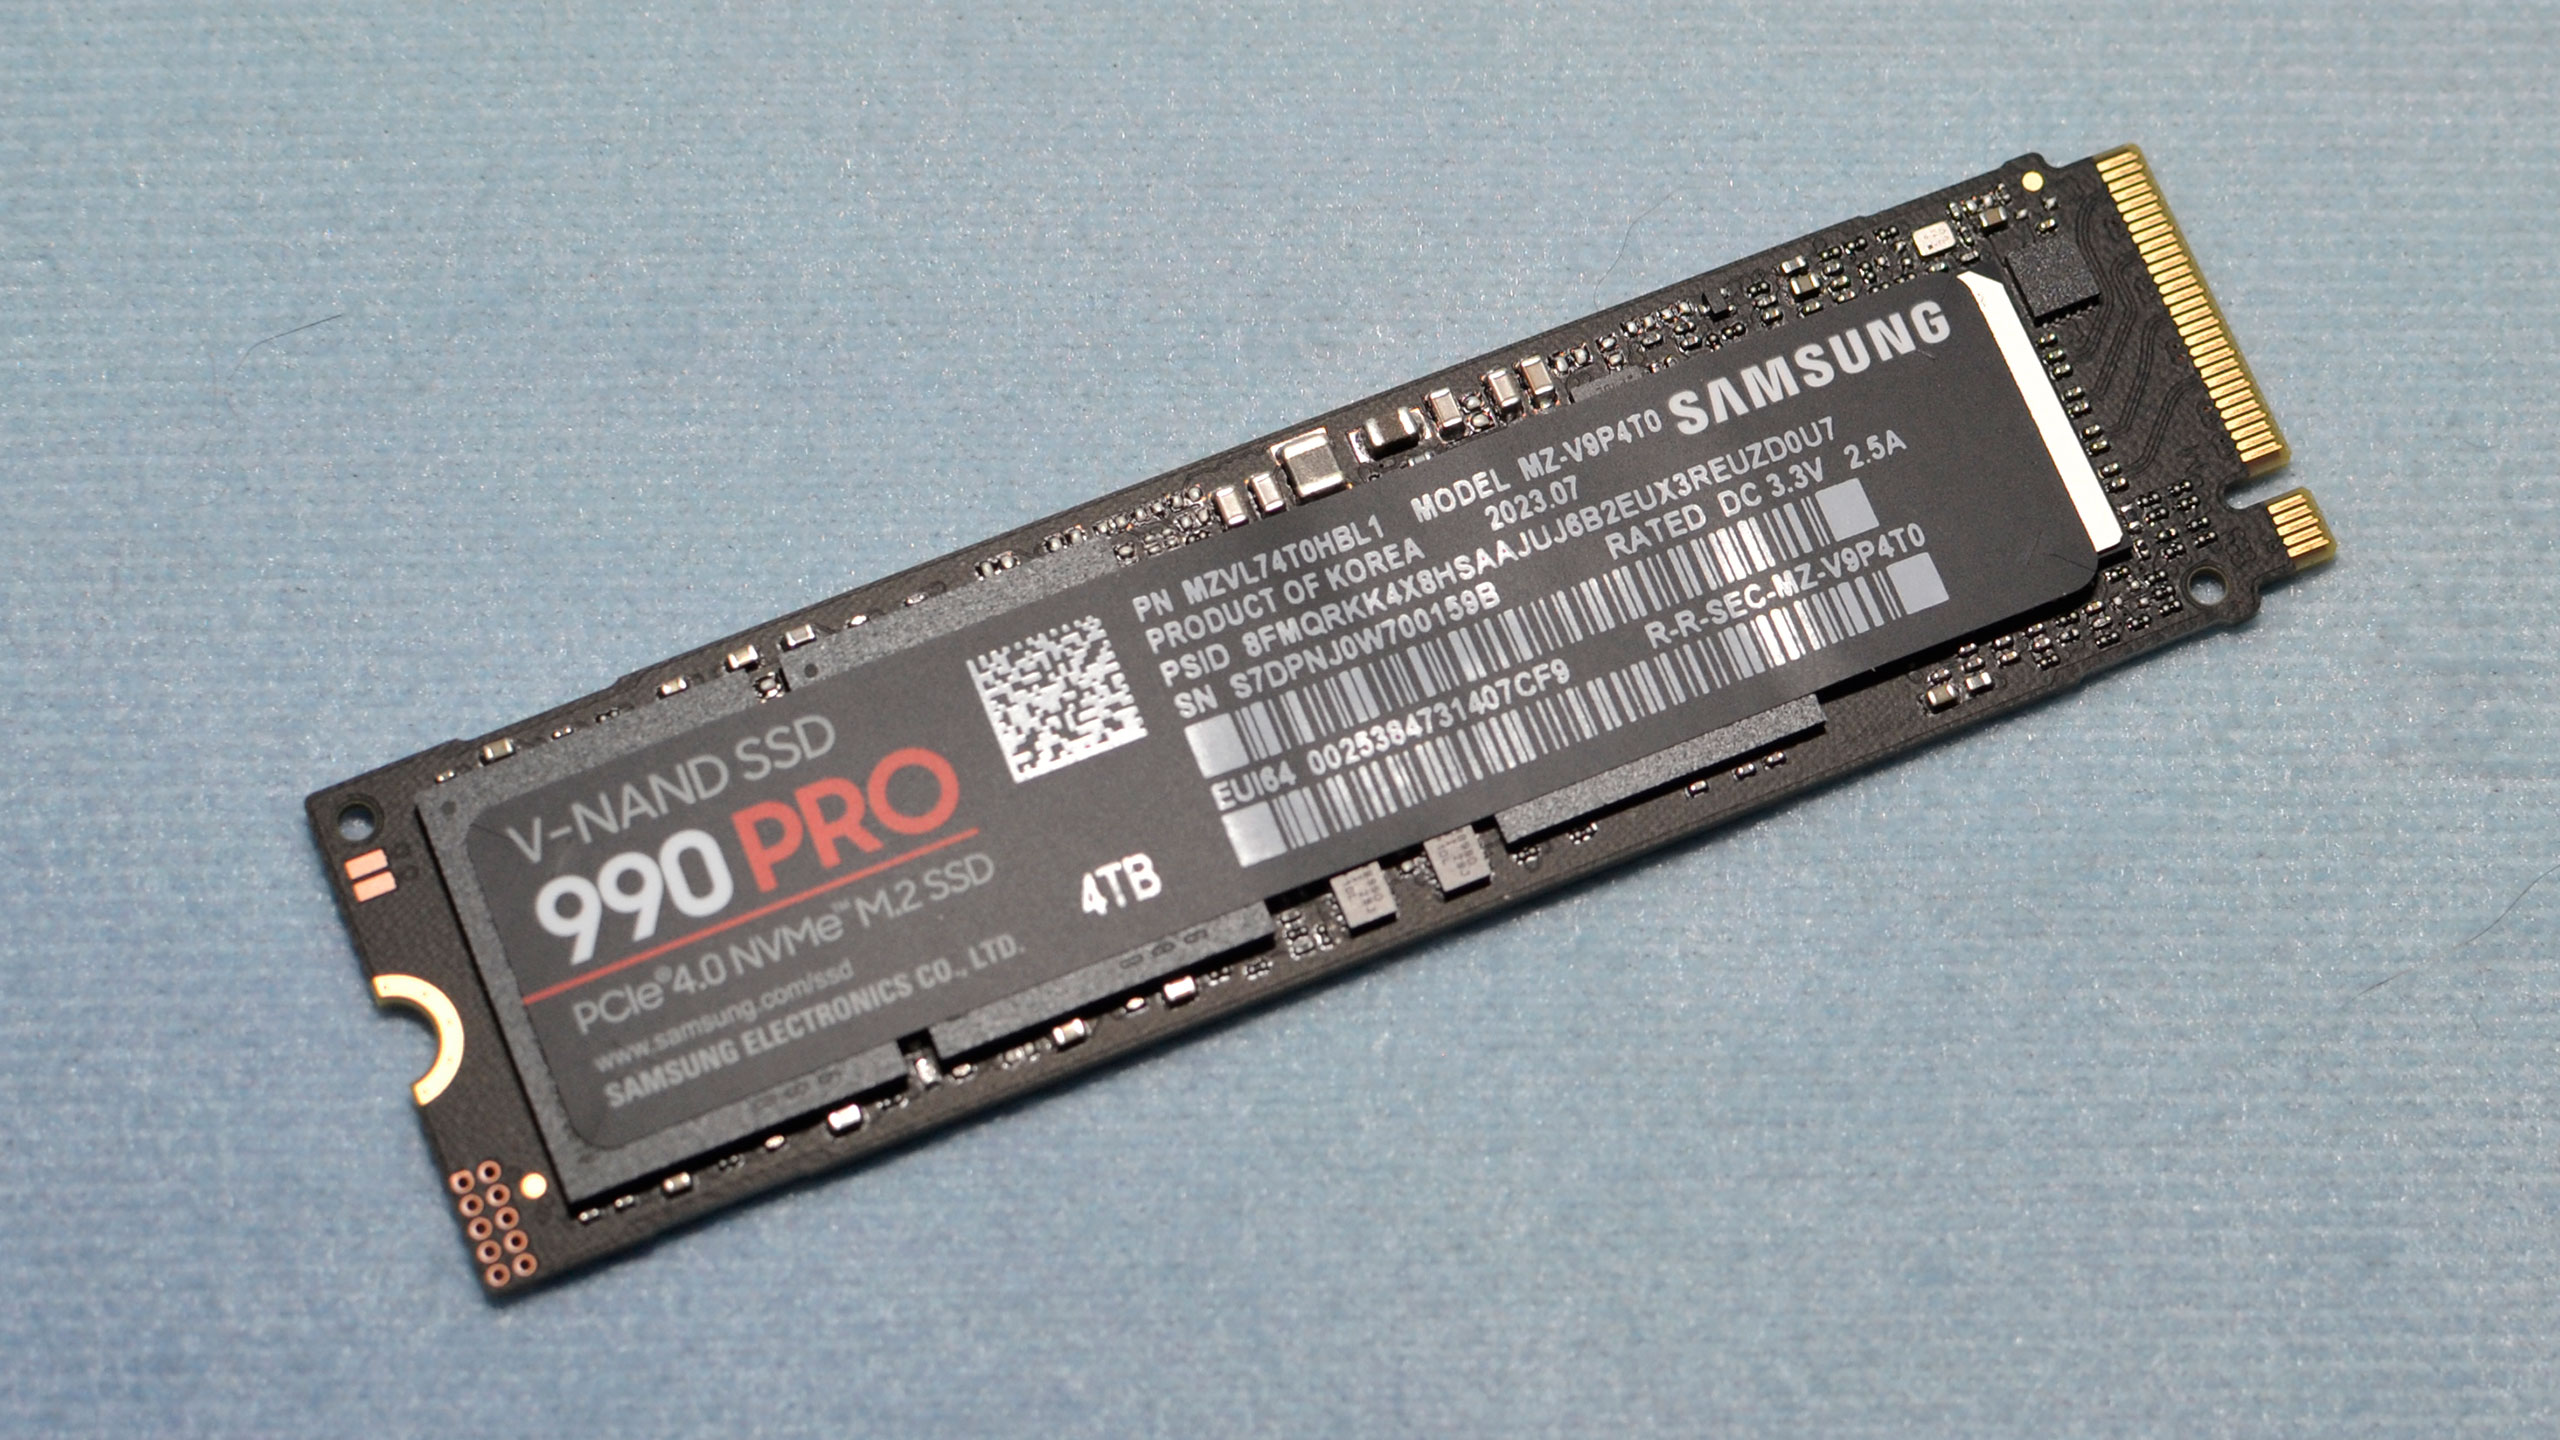 Samsung 990 Pro 4TB SSD Review – Fast, but Overkill - GeekaWhat